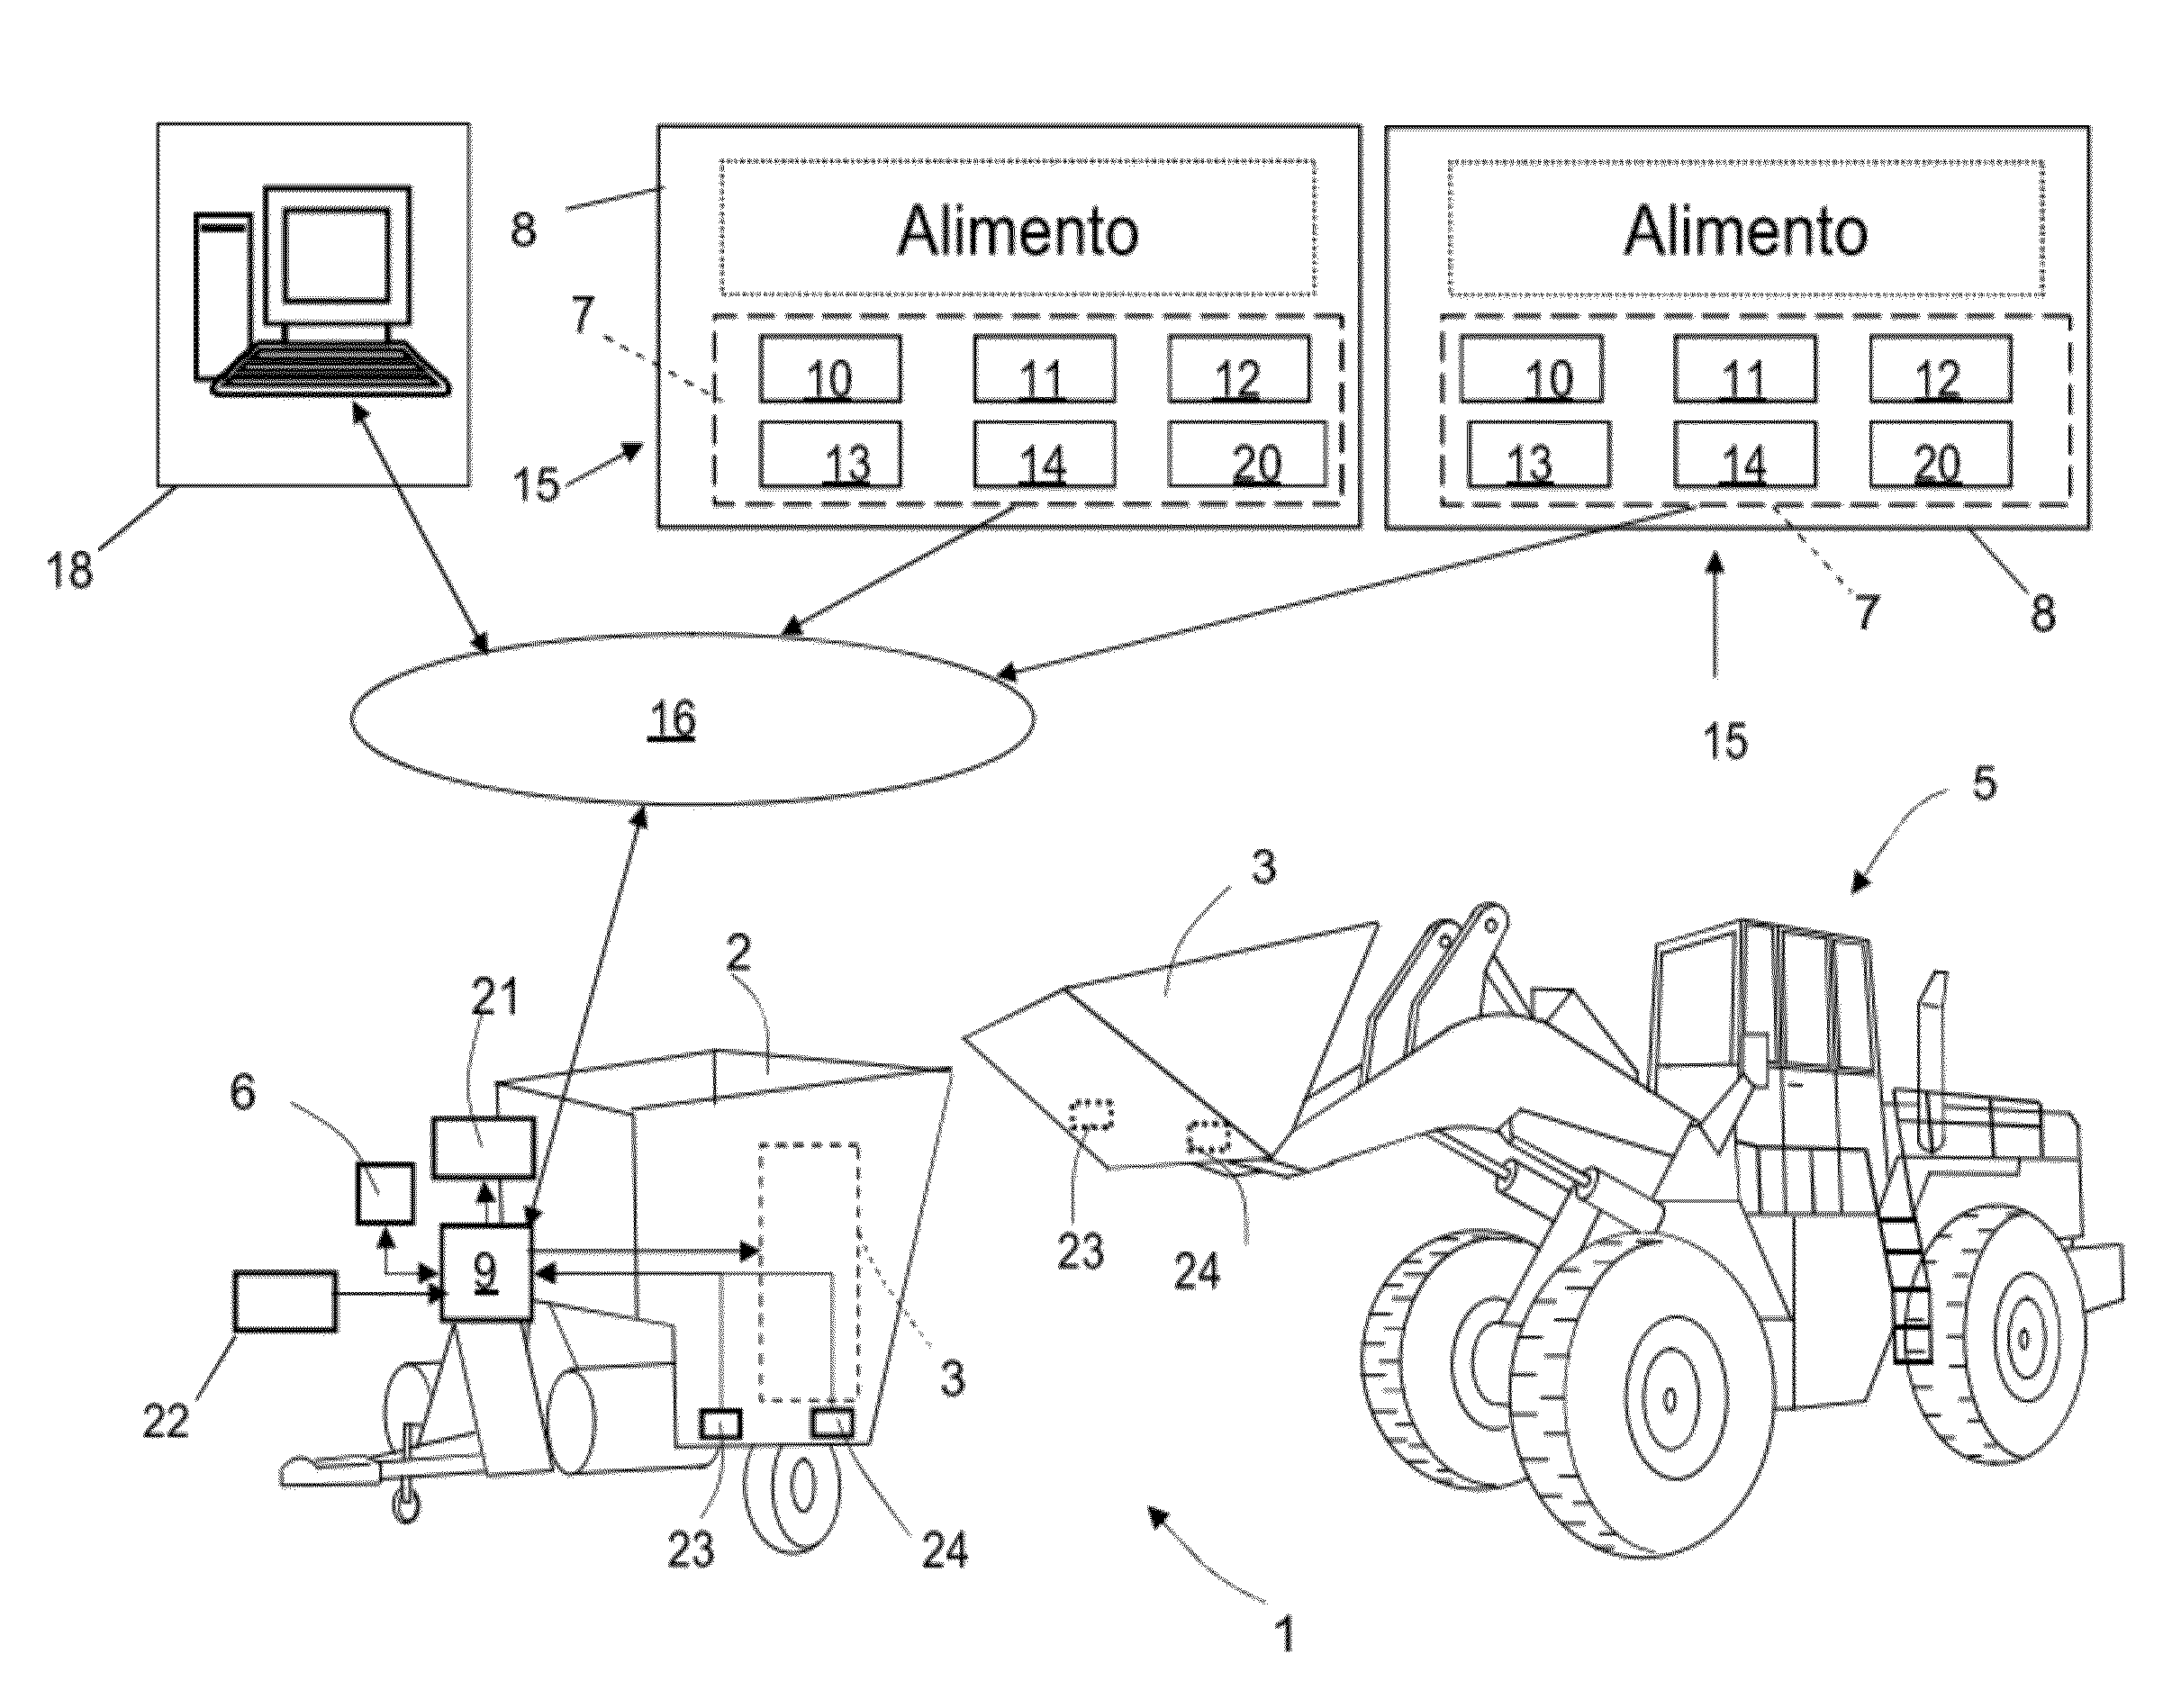 System and method for automatically adjusting the dosage of feed products in a livestock feed recipe